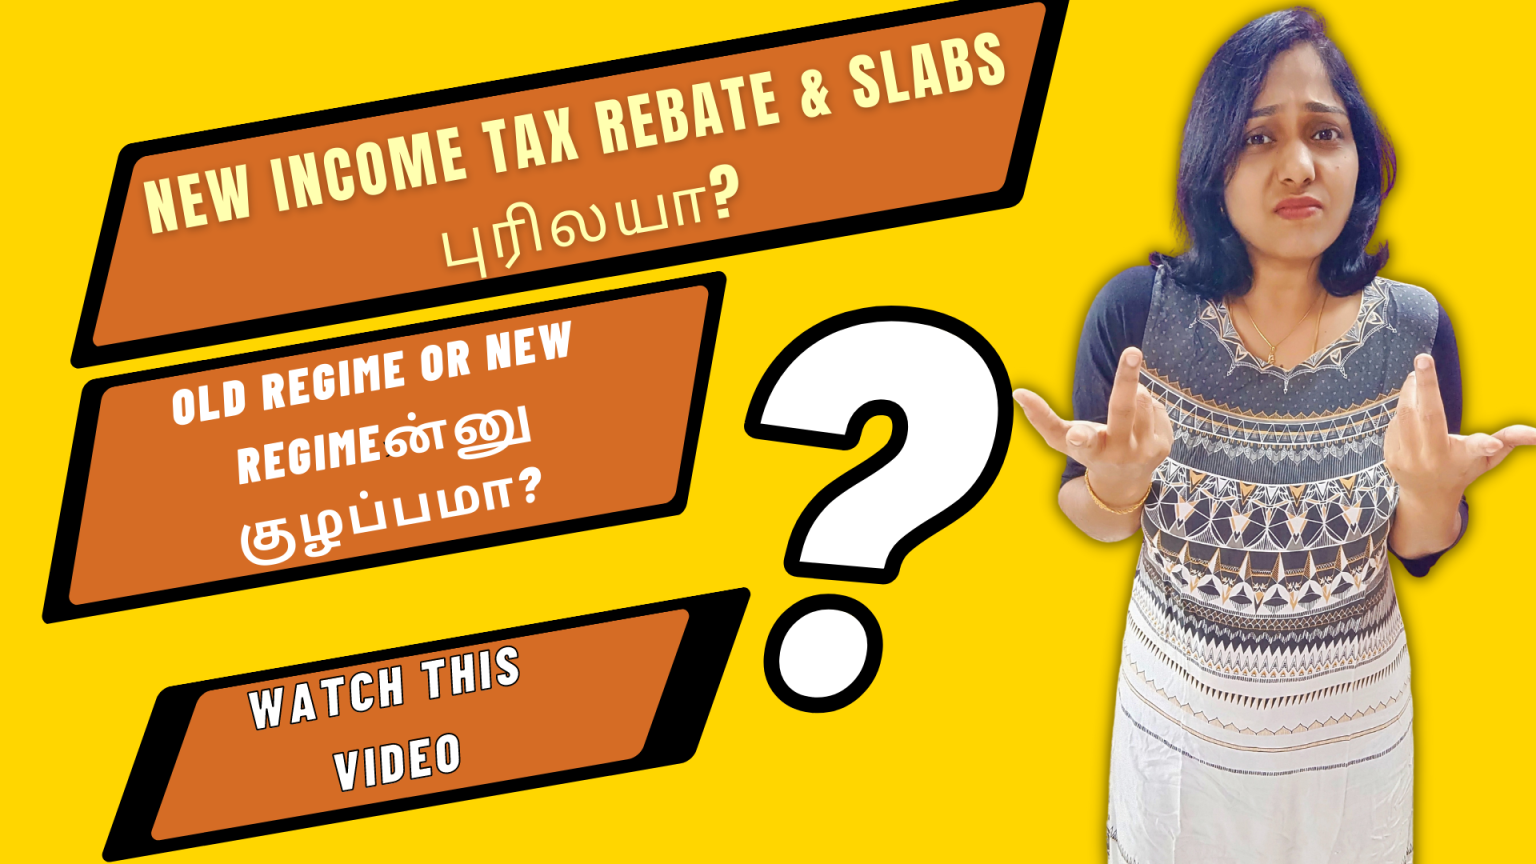 income-tax-new-regime-rebate-and-slabs-explained-should-you-choose-the-old-or-new-regime